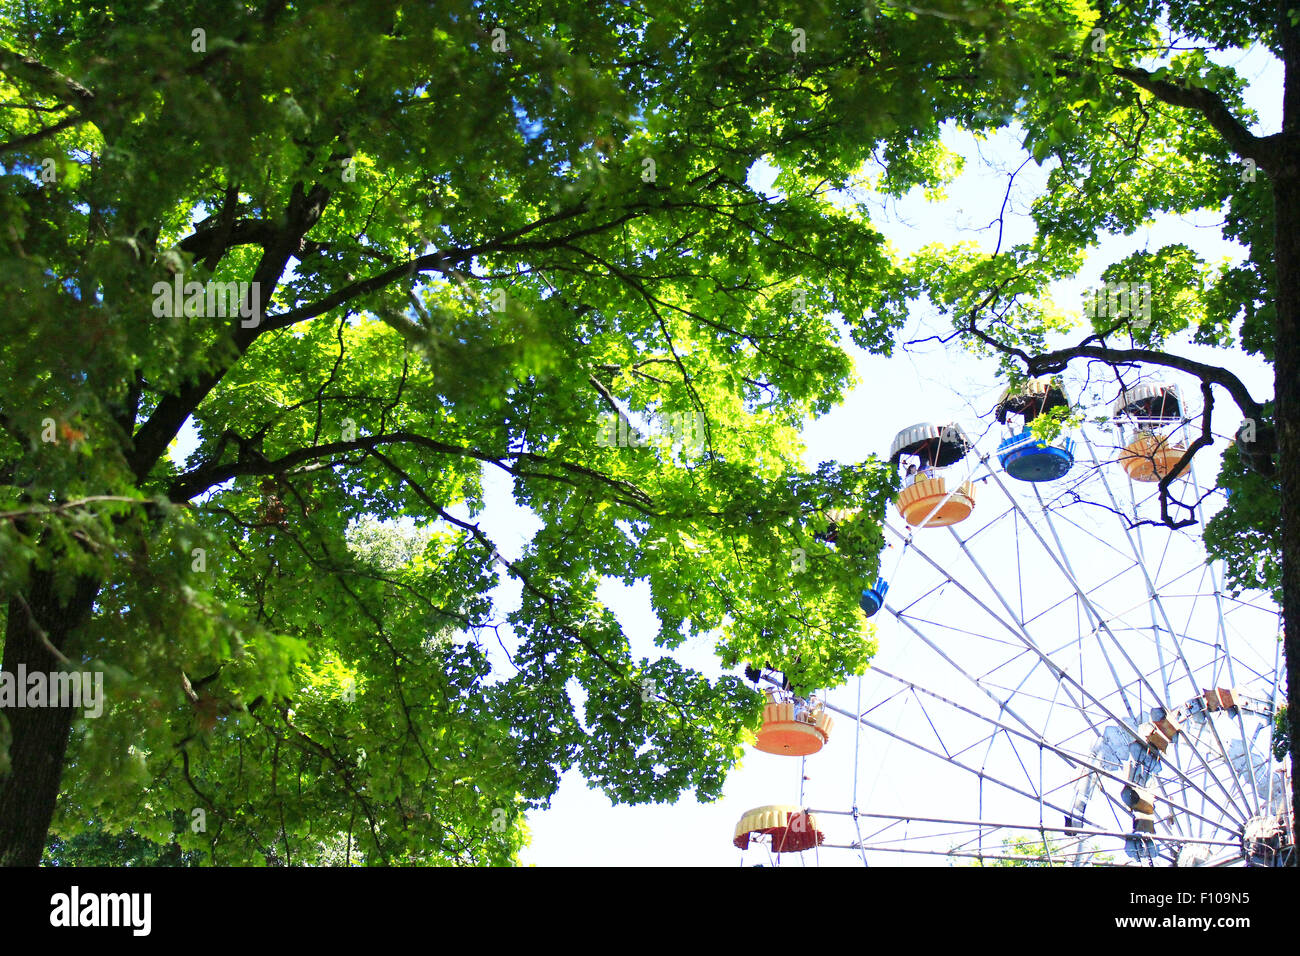 ferris wheel in the park with big green trees Stock Photo